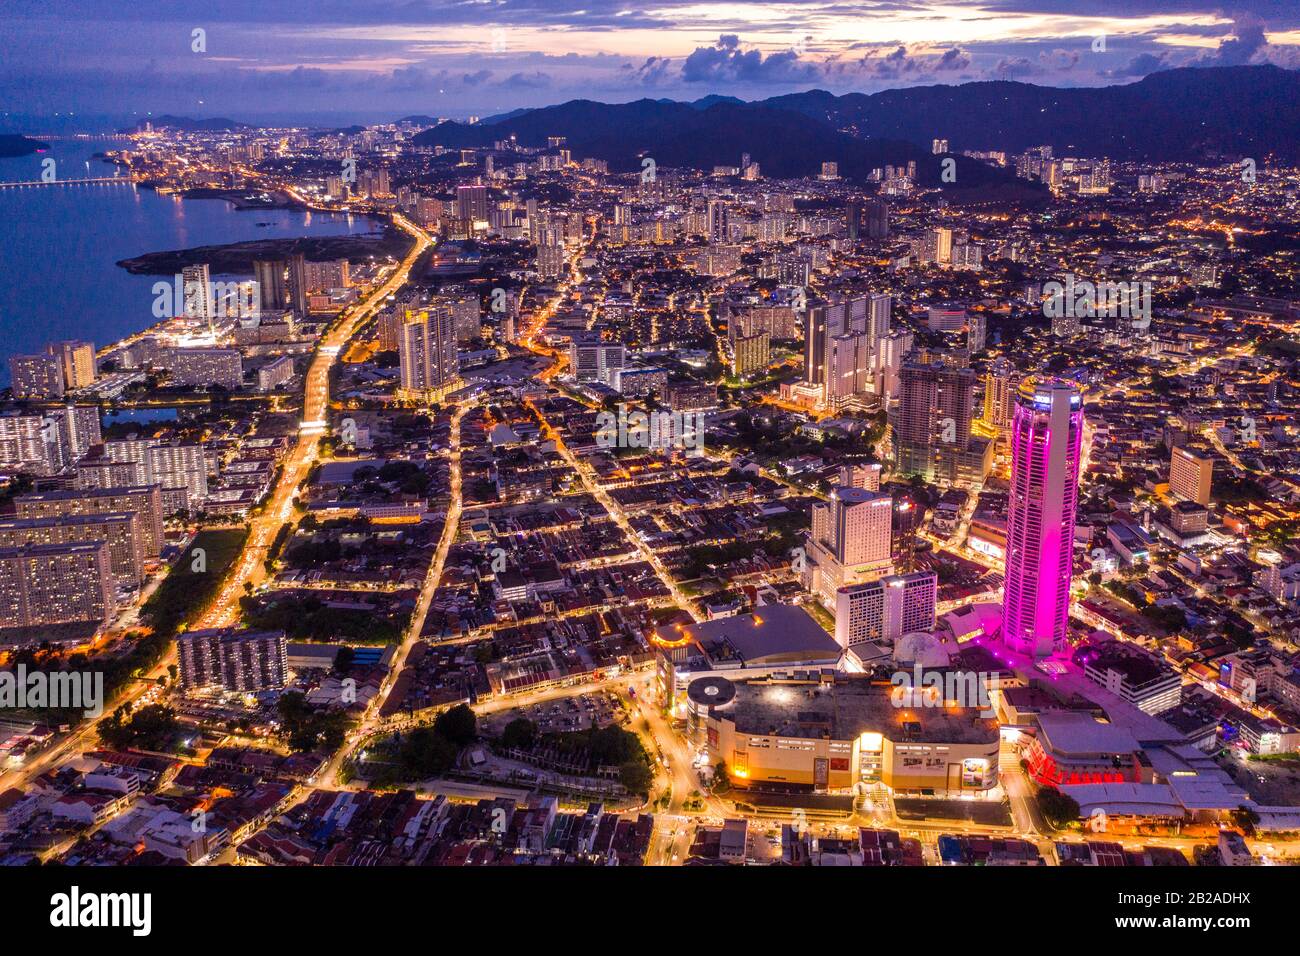 Aerial view of Georgetown at night, Penang, Malaysia Stock Photo